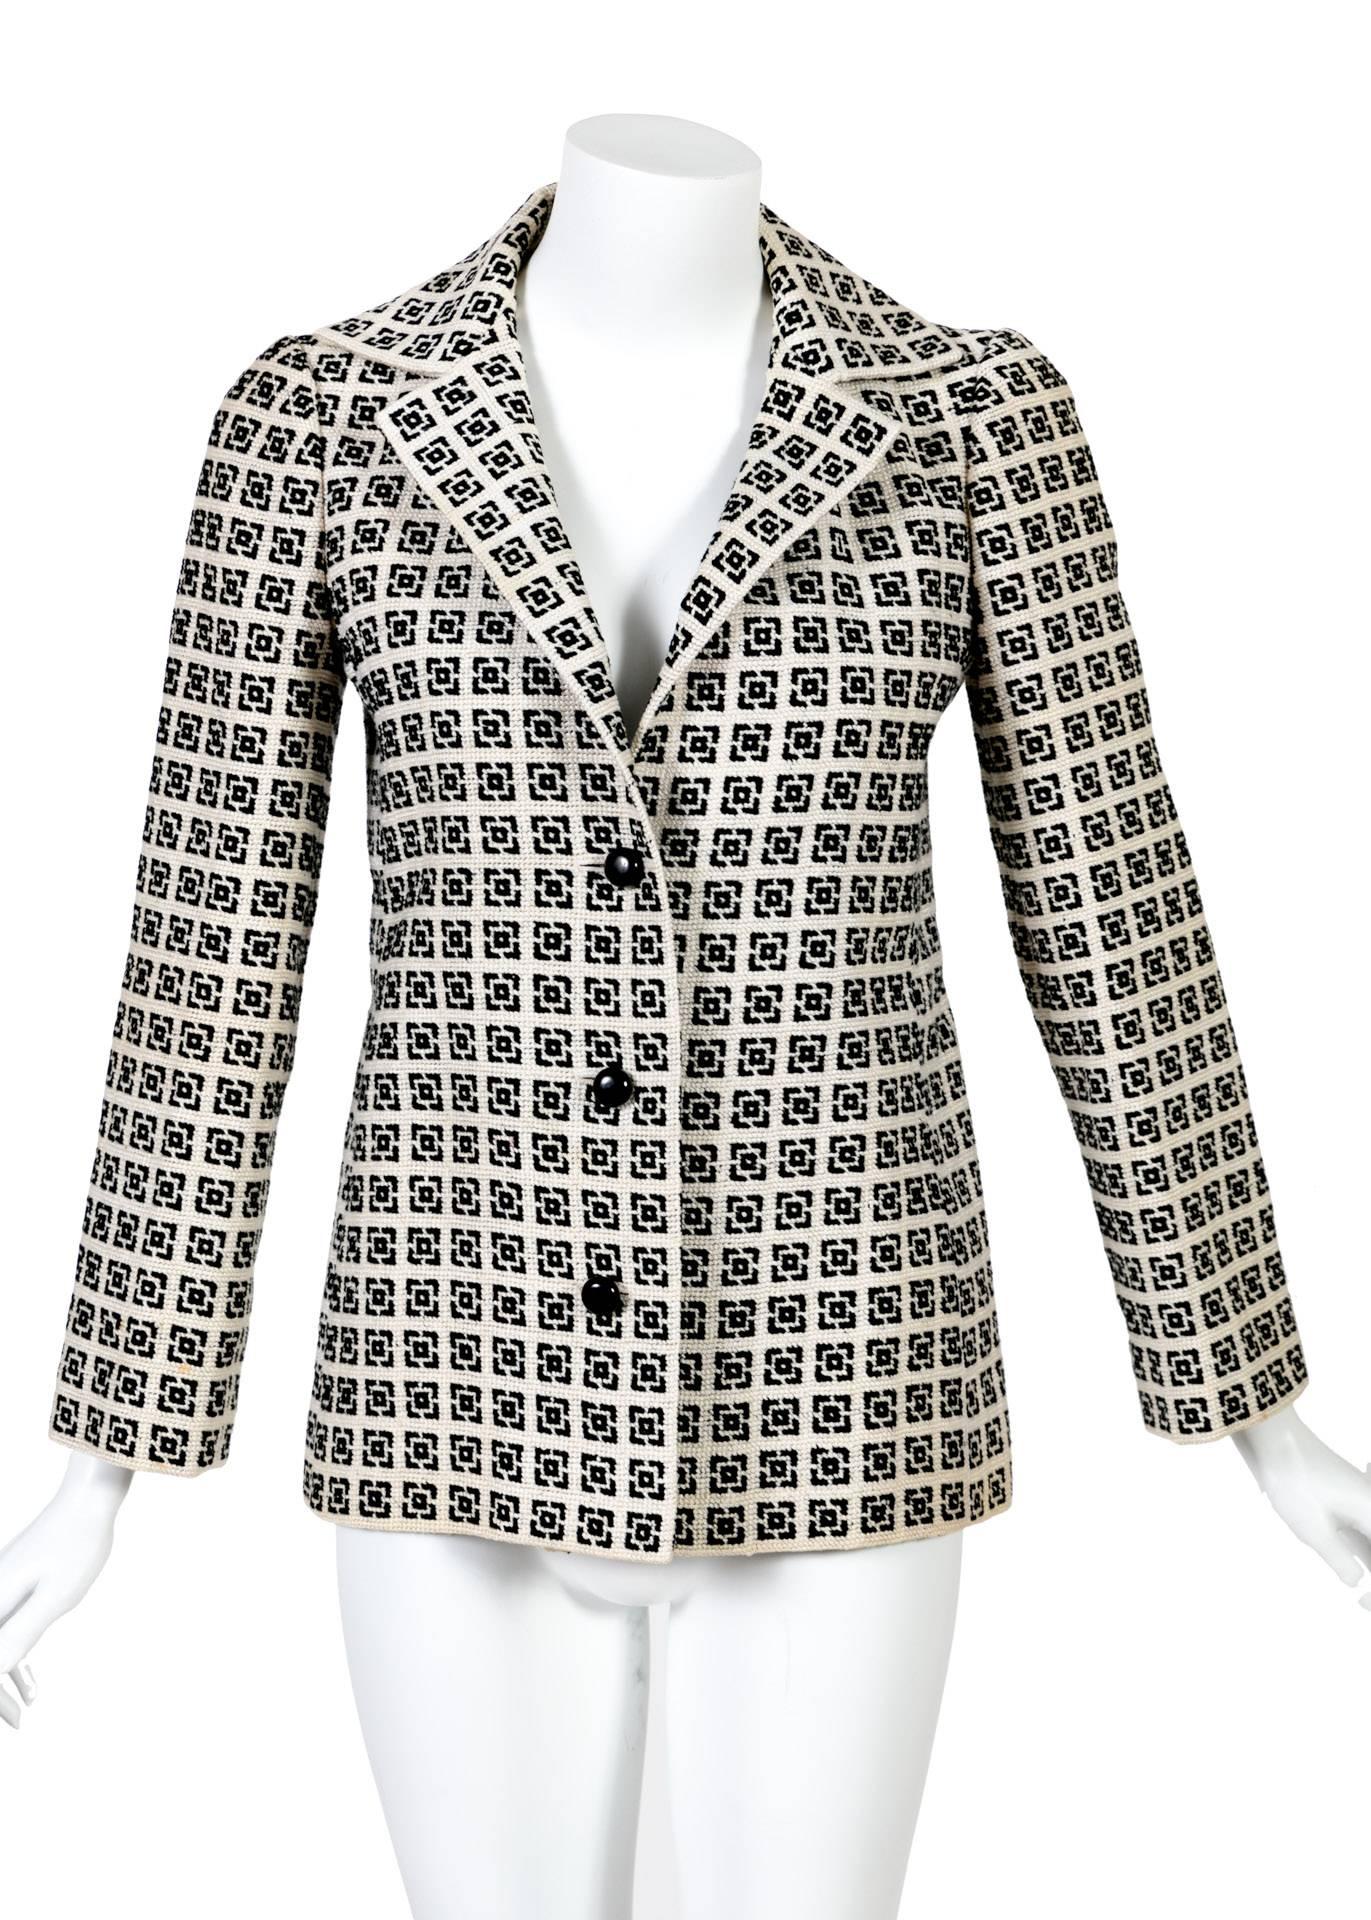 Remarkably, Karl Lagerfeld has not always been renowned. His early work for Italian label Tiziani Roma portends his legendary design career as exampled by this mod jacket. A skillful blend of op-art and handcraft, one can easily imagine this 1960s